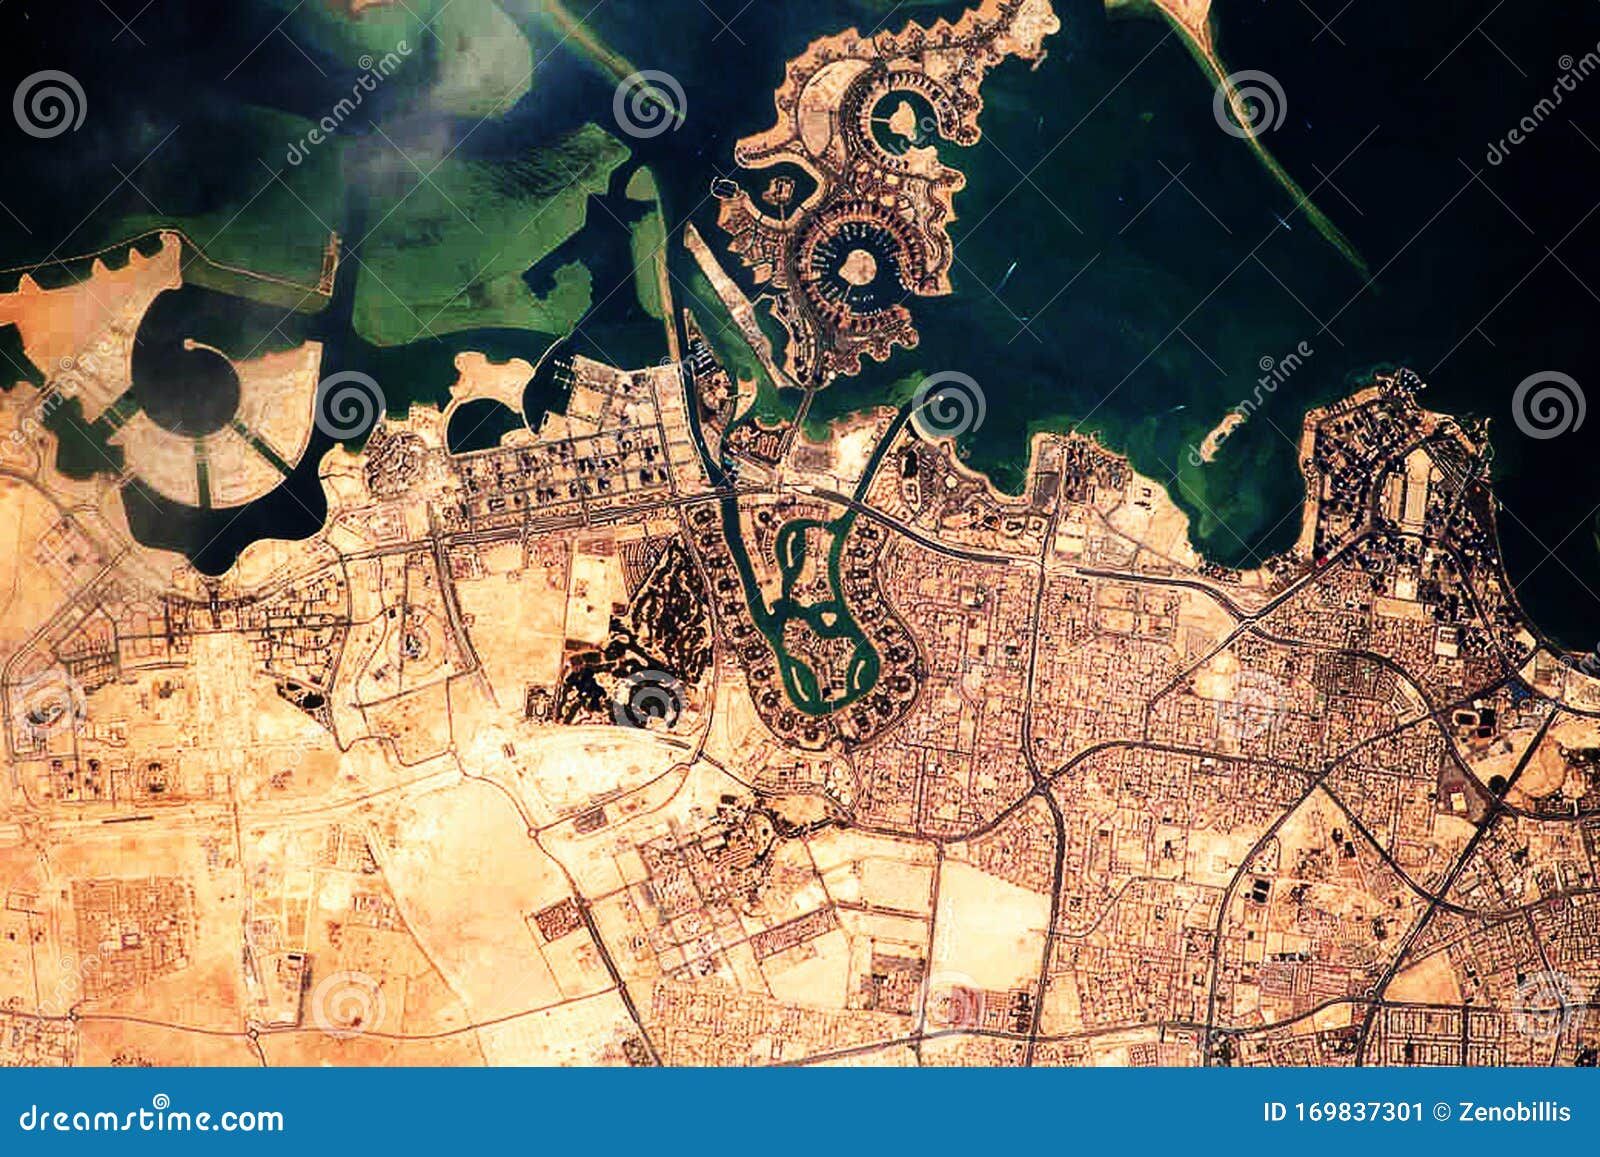 aerial view of doha, the capital and largest city of the arab state of qatar. satellite view